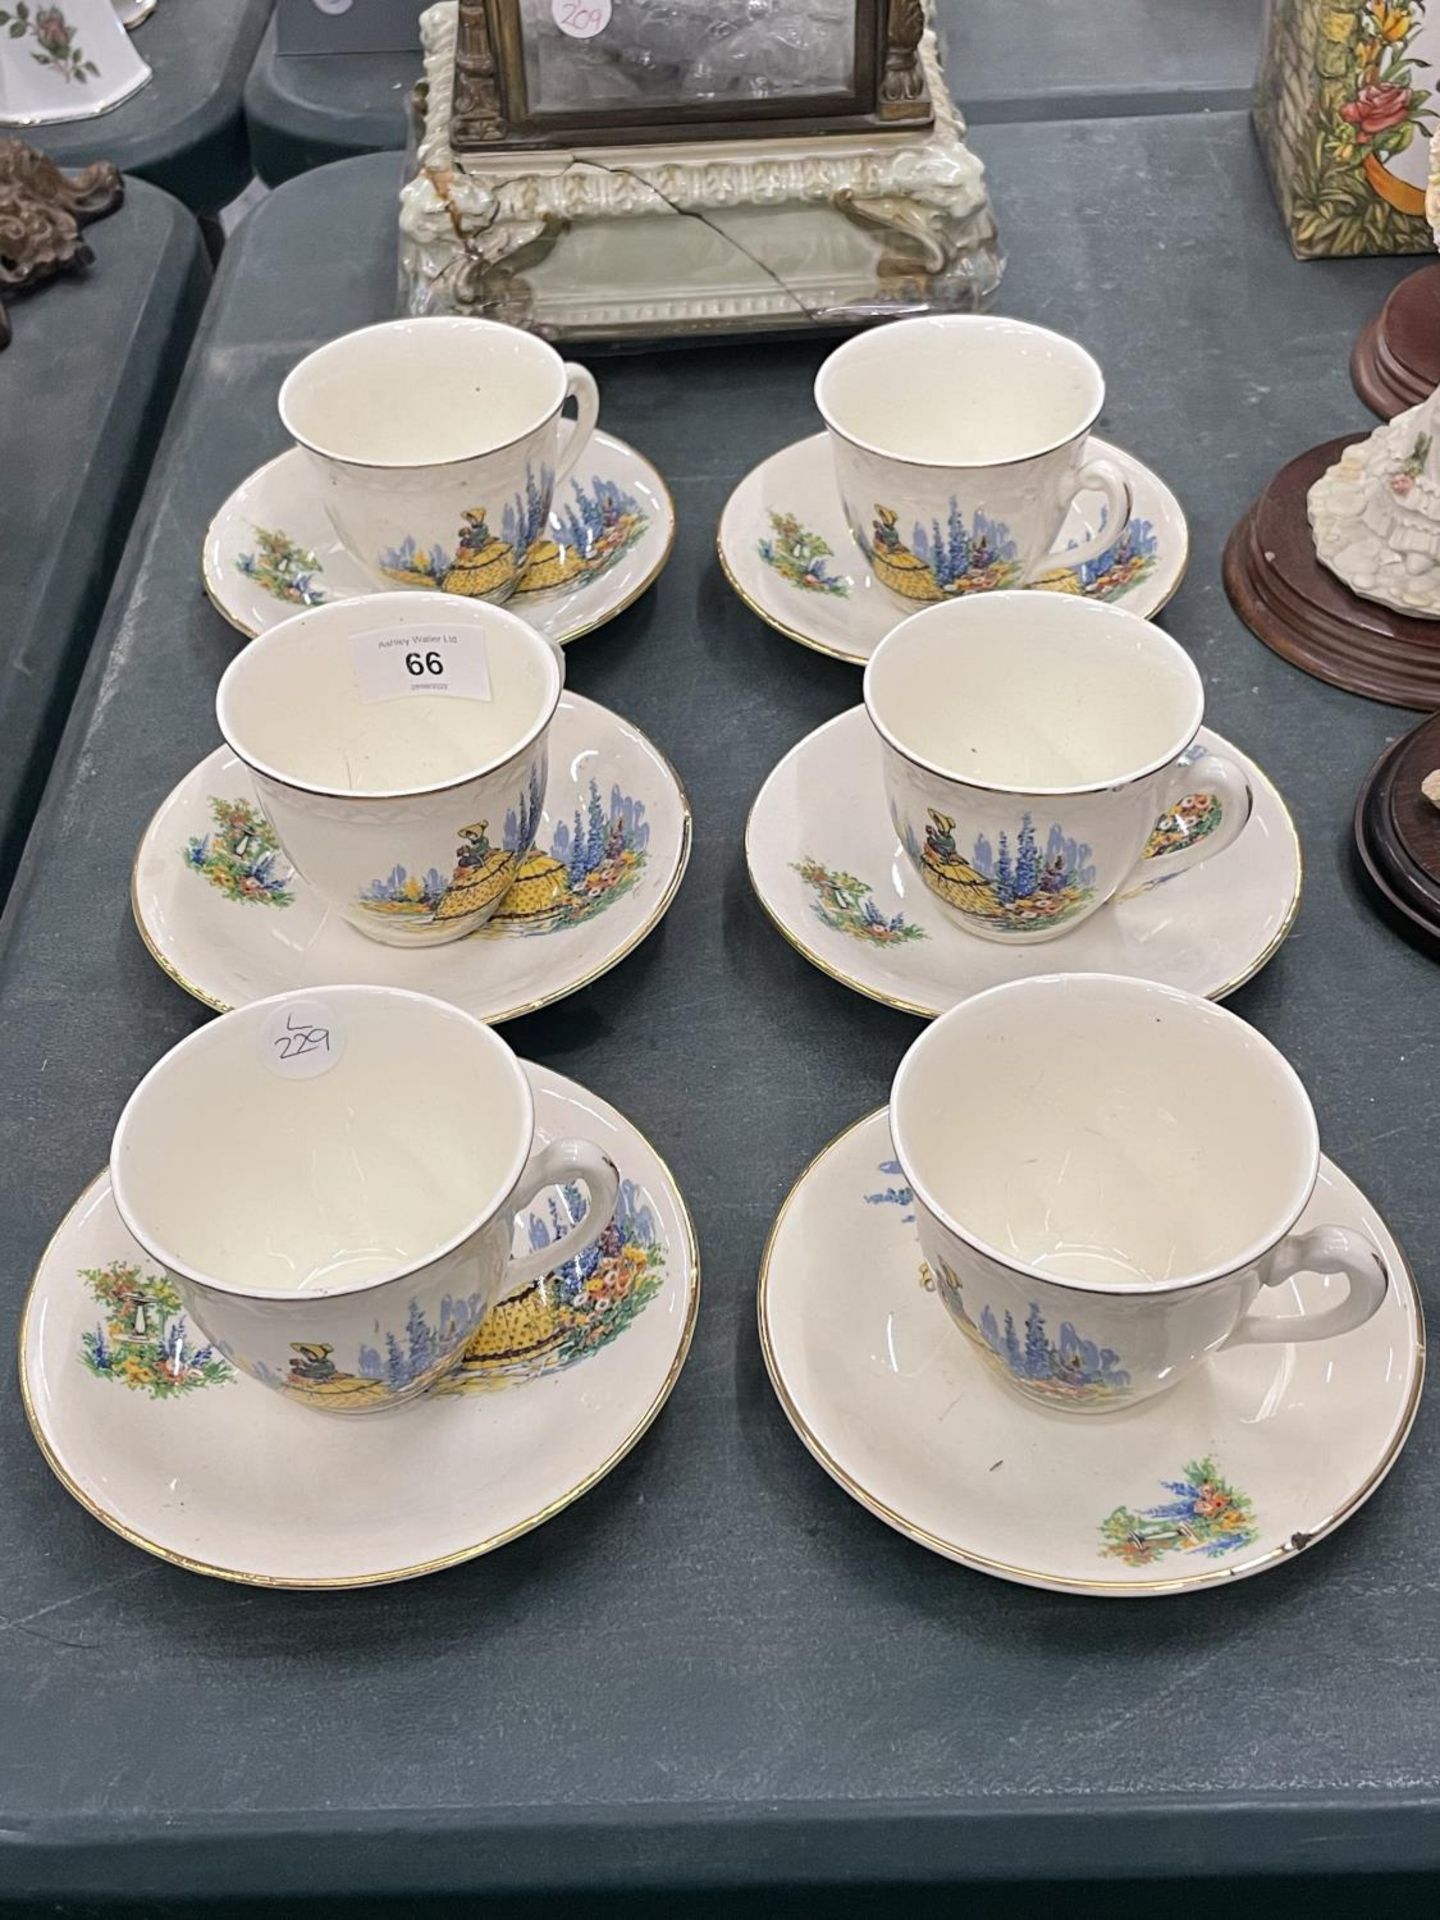 SIX VINTAGE CUPS AND SAUCERS WITH CRINOLINE DECORATION